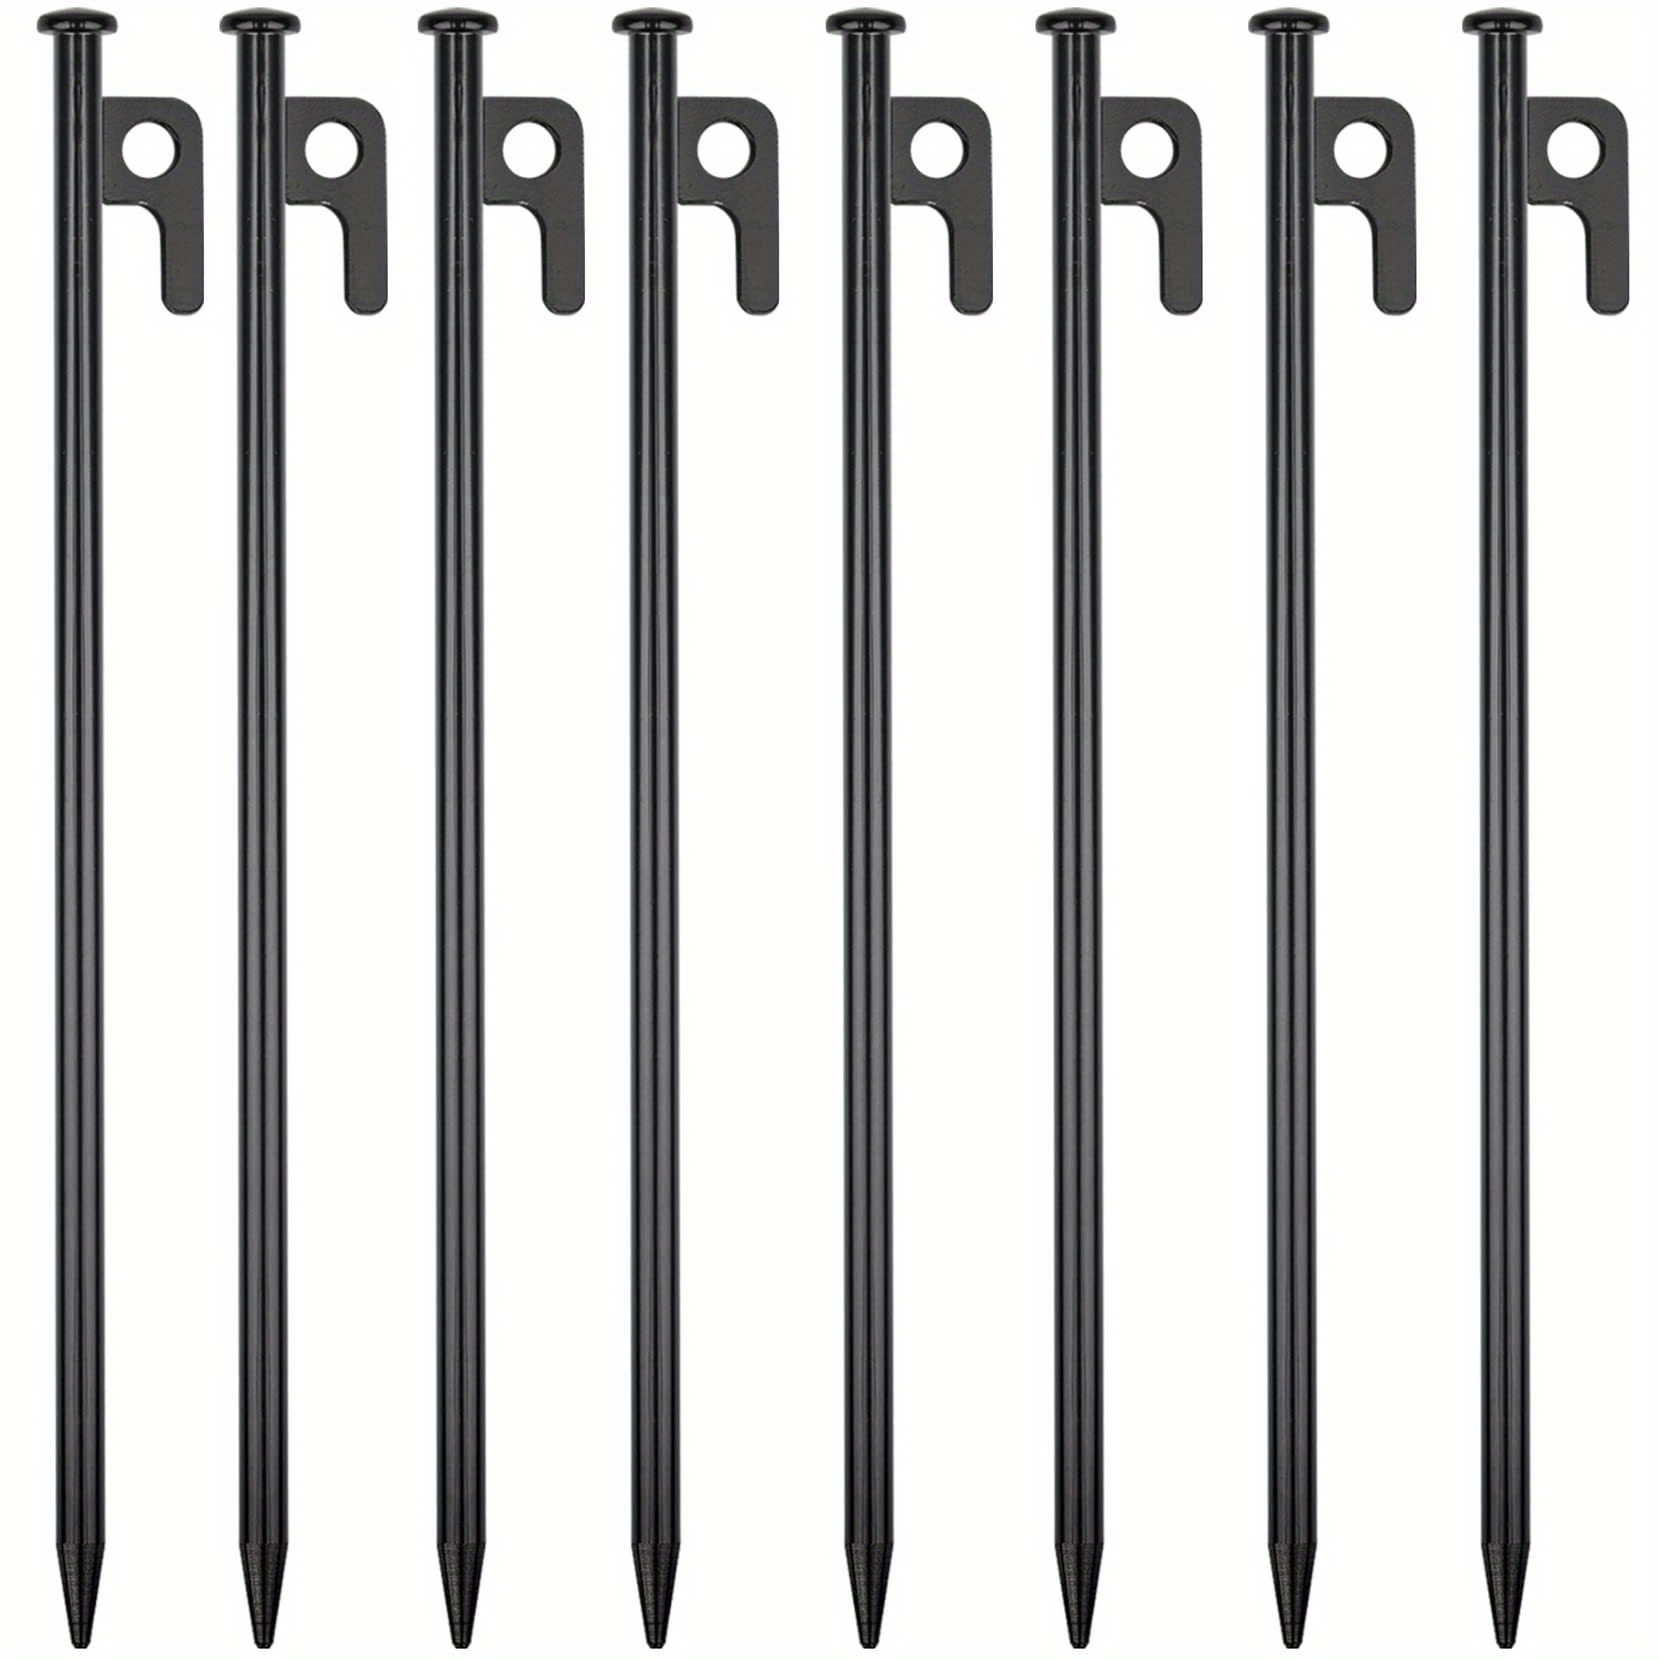 Forged Steel Tent Pegs - Small (1pcs) 20cm, Tent Pegs